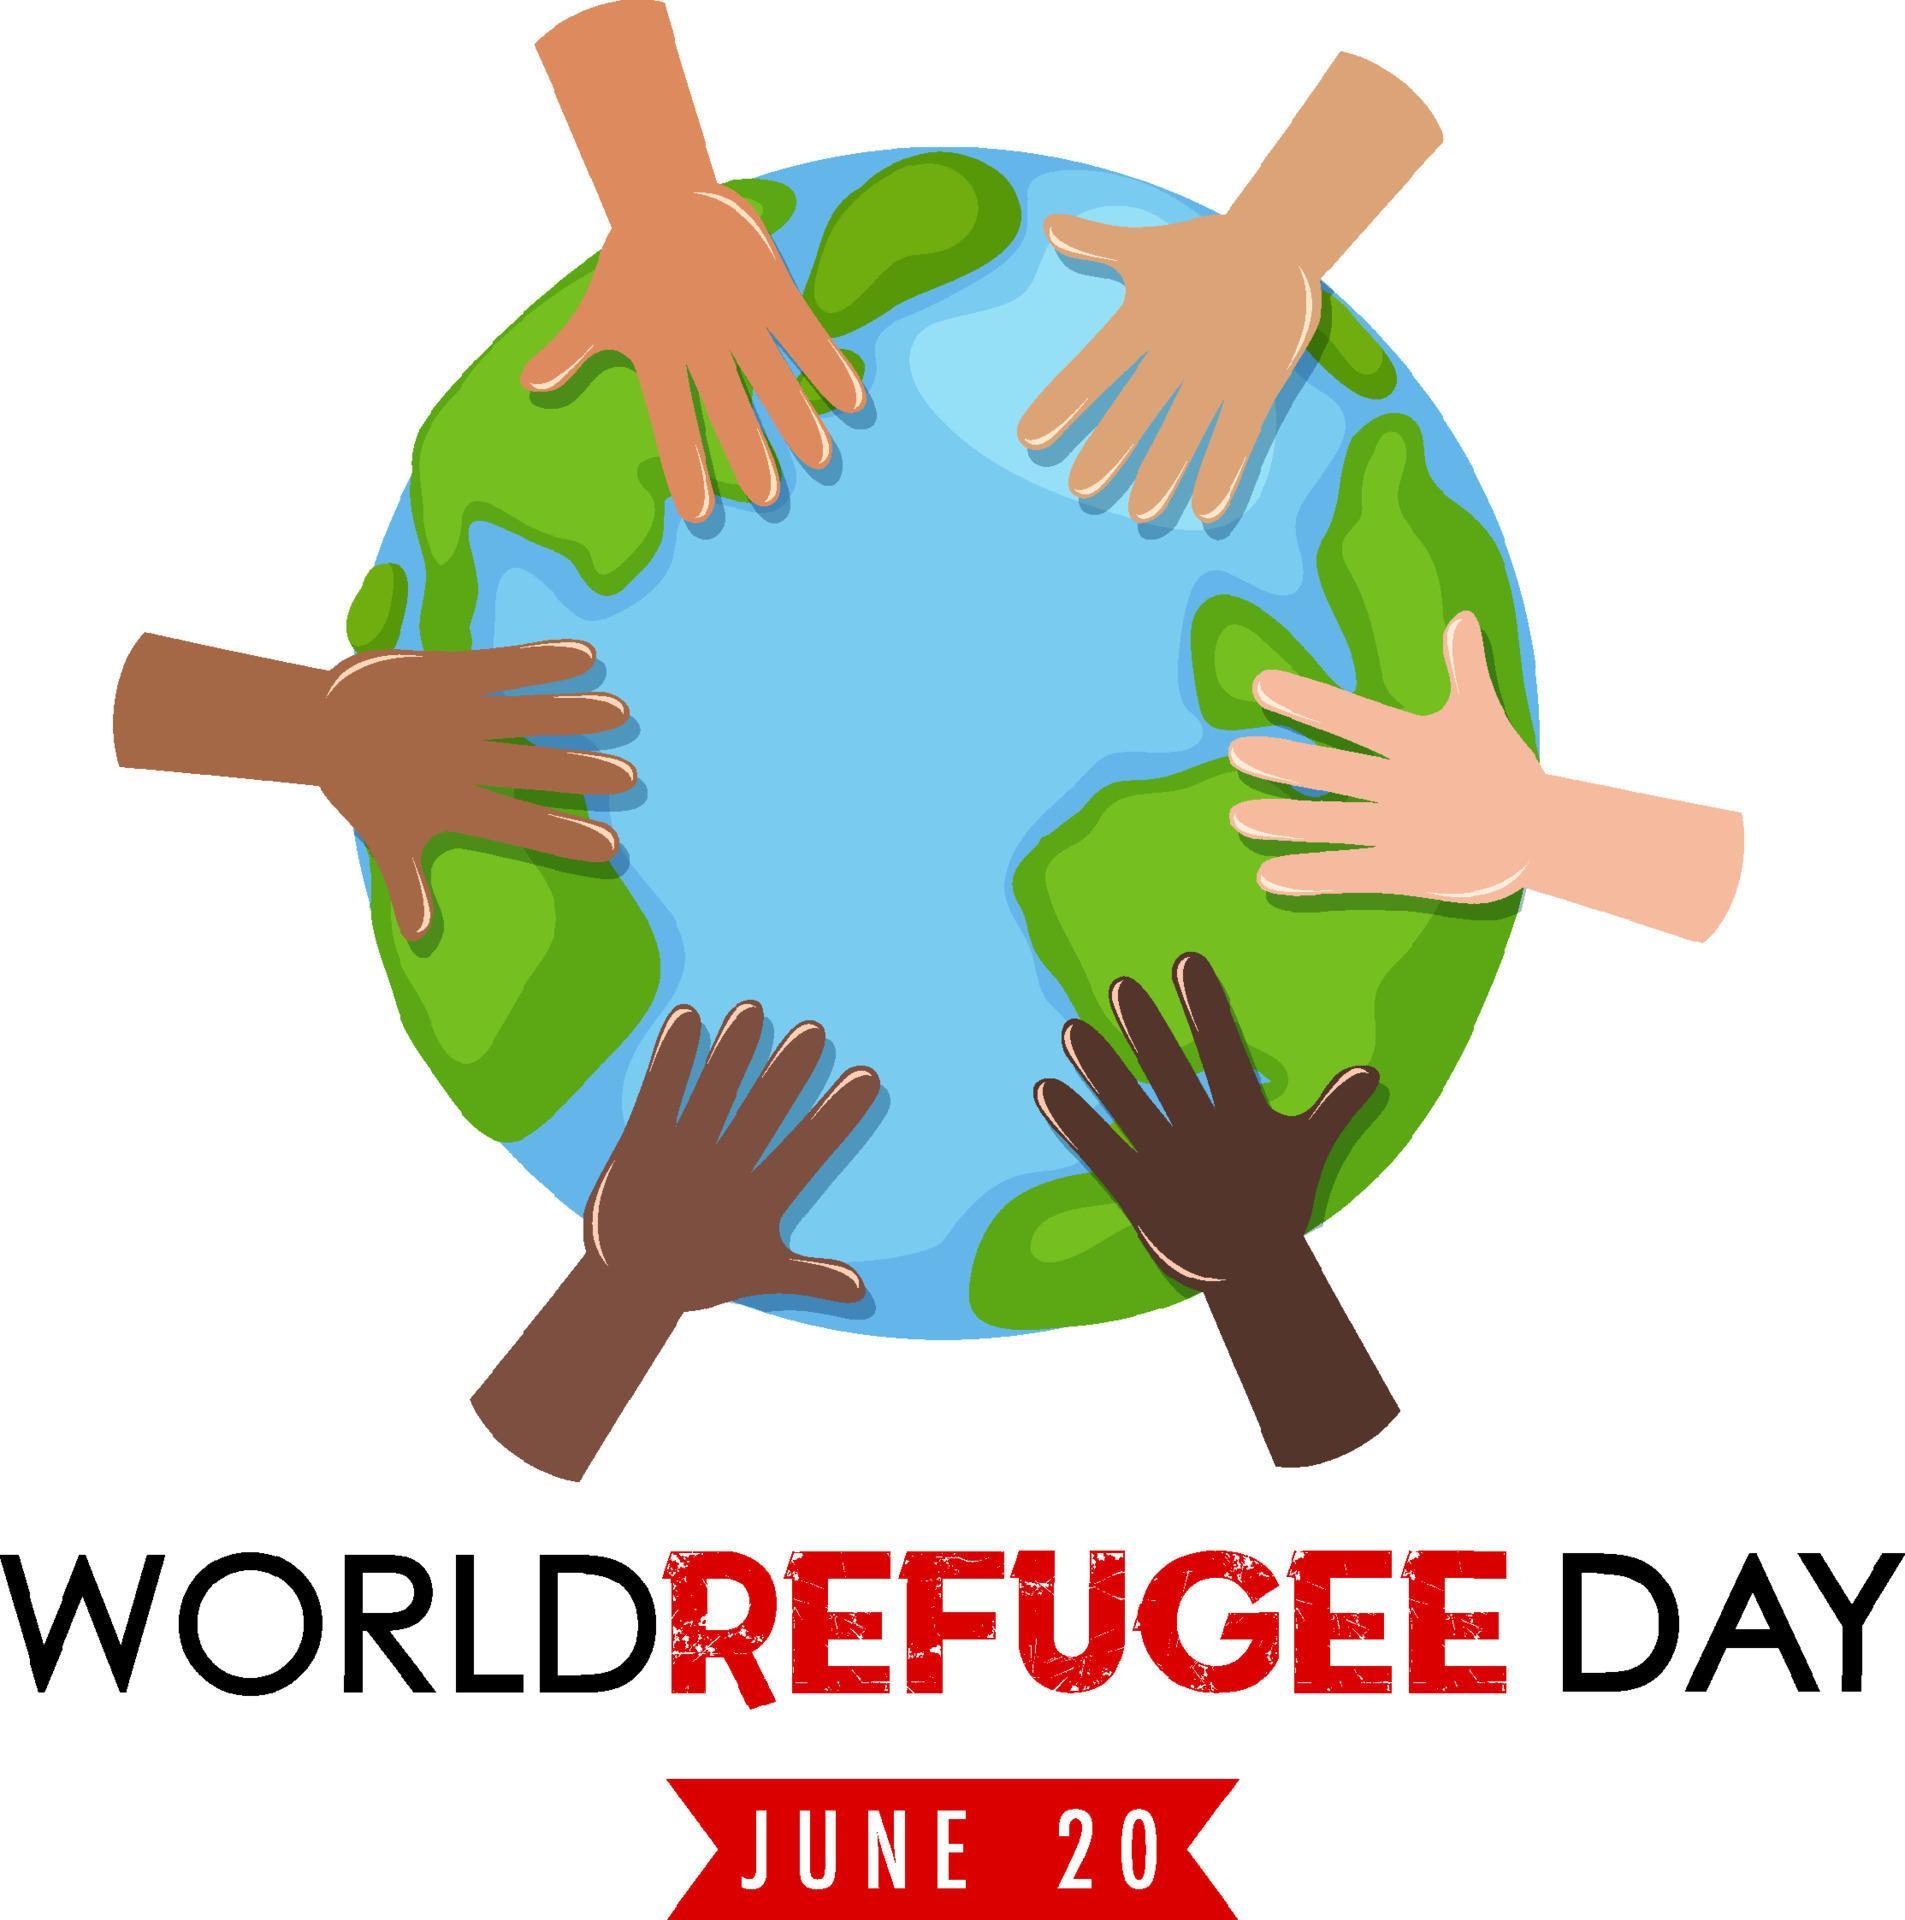 World Refugee Day banner with different hands on globe isolated 3489605